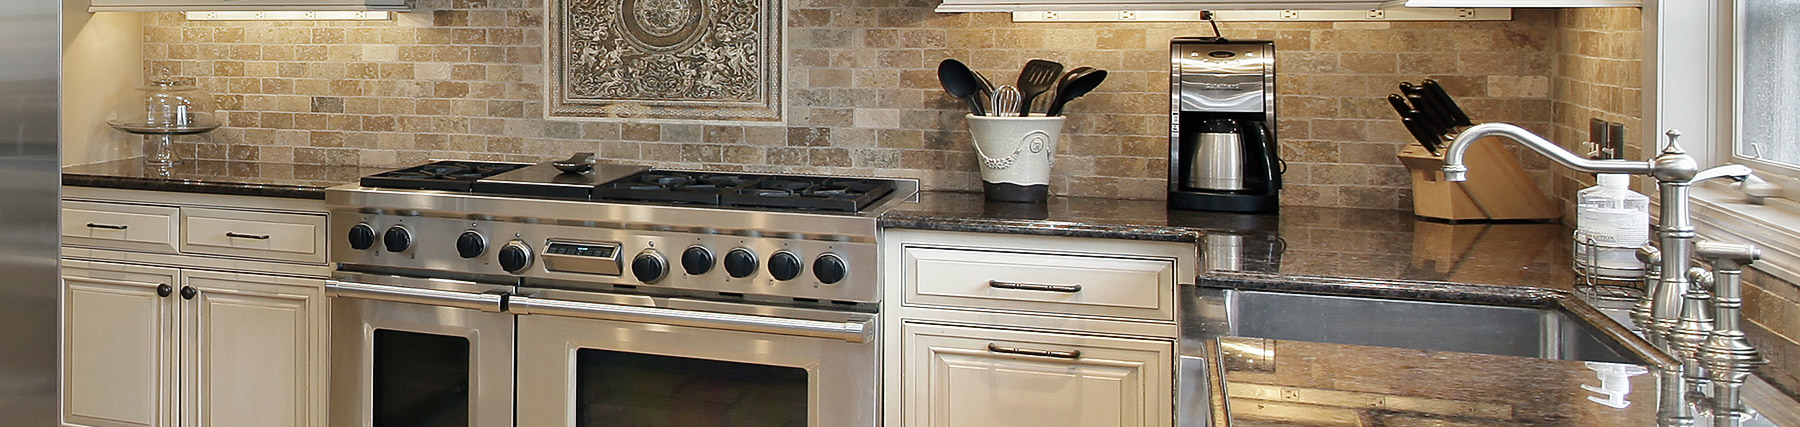 Clearwater Granite and Quartz countertops : Licensed, Bonded and Insured